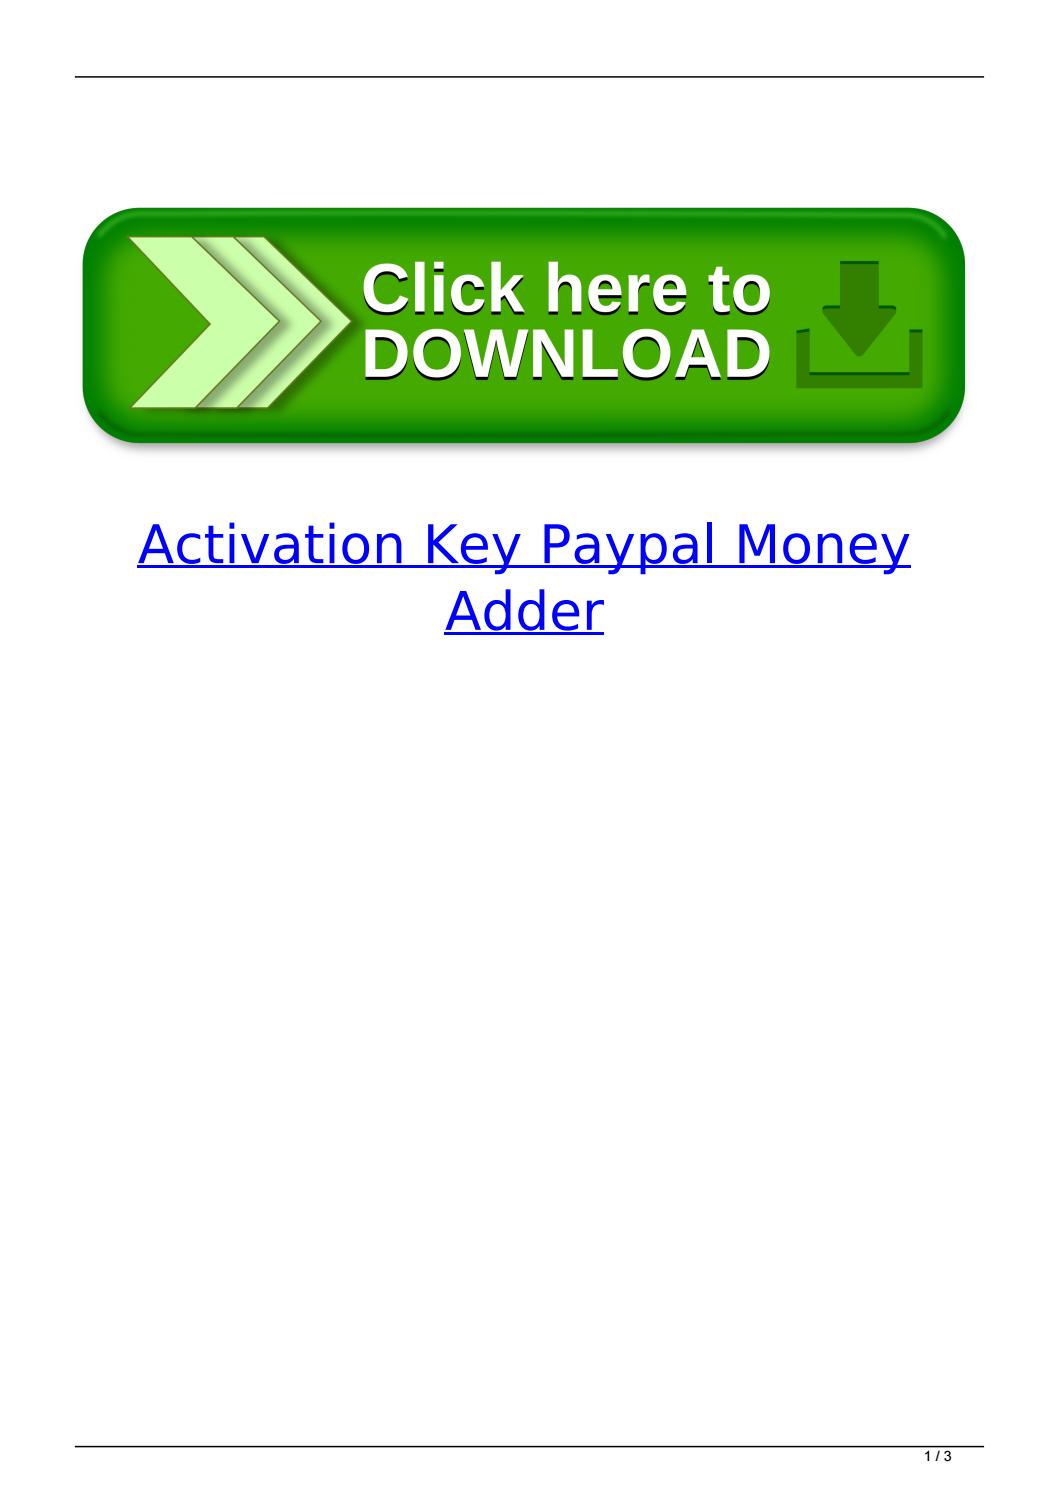 Paypal money adder v8 0 activation code free shipping